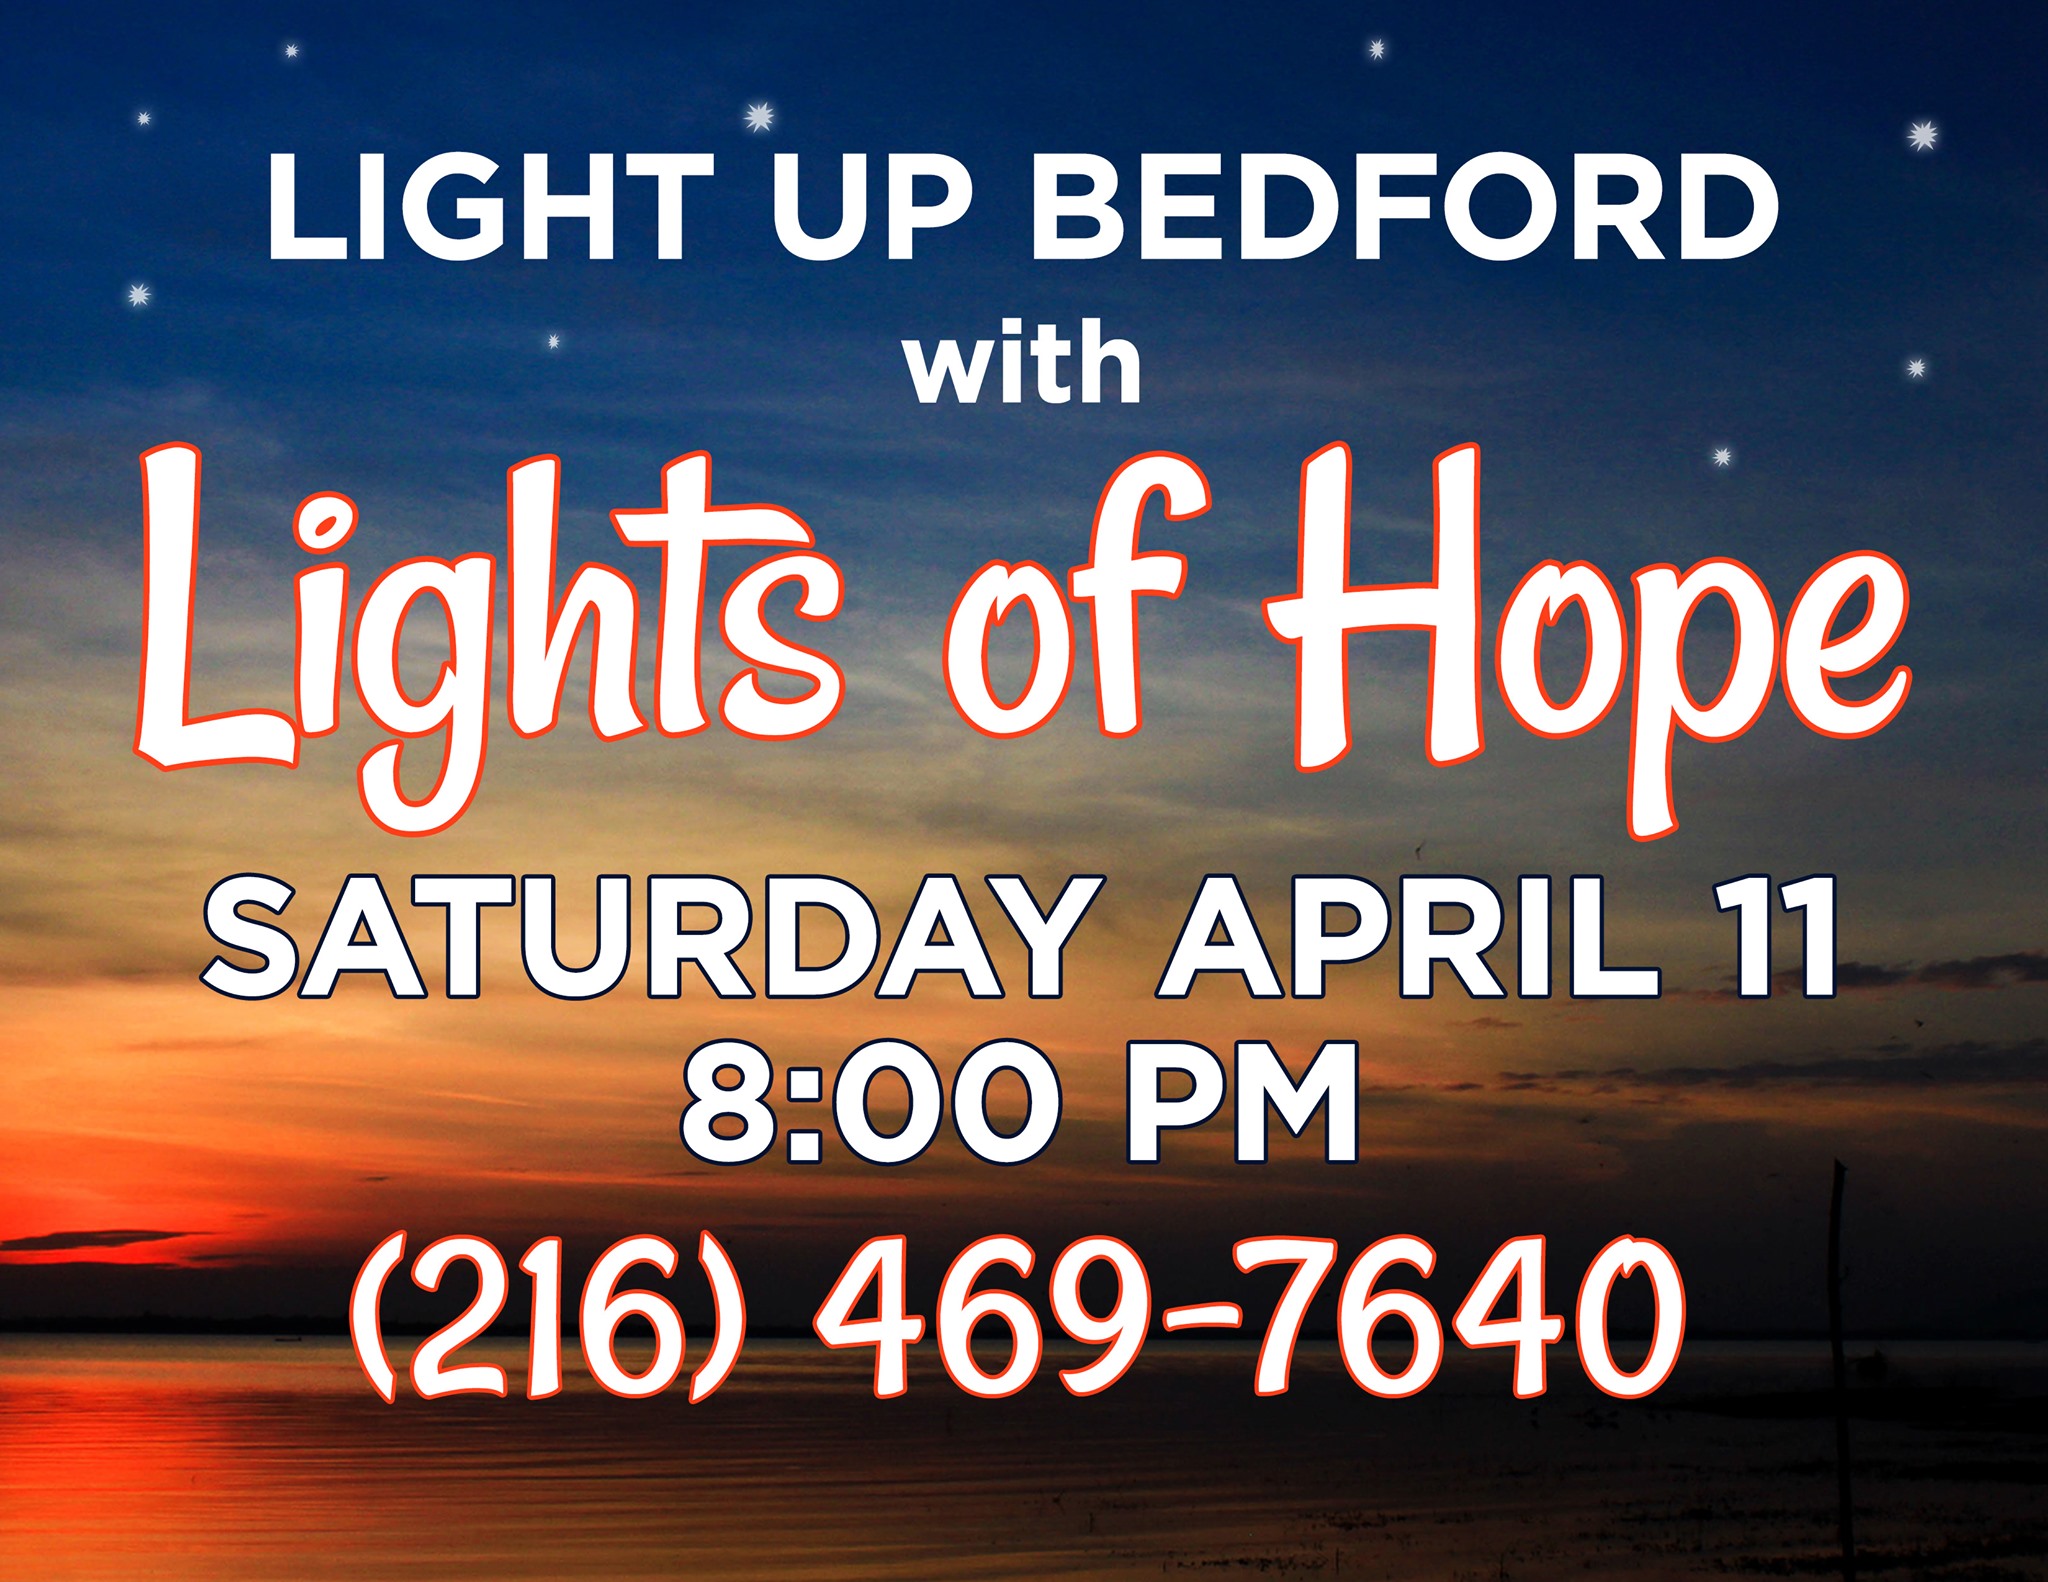 Light Up Bedford with Lights of Hope